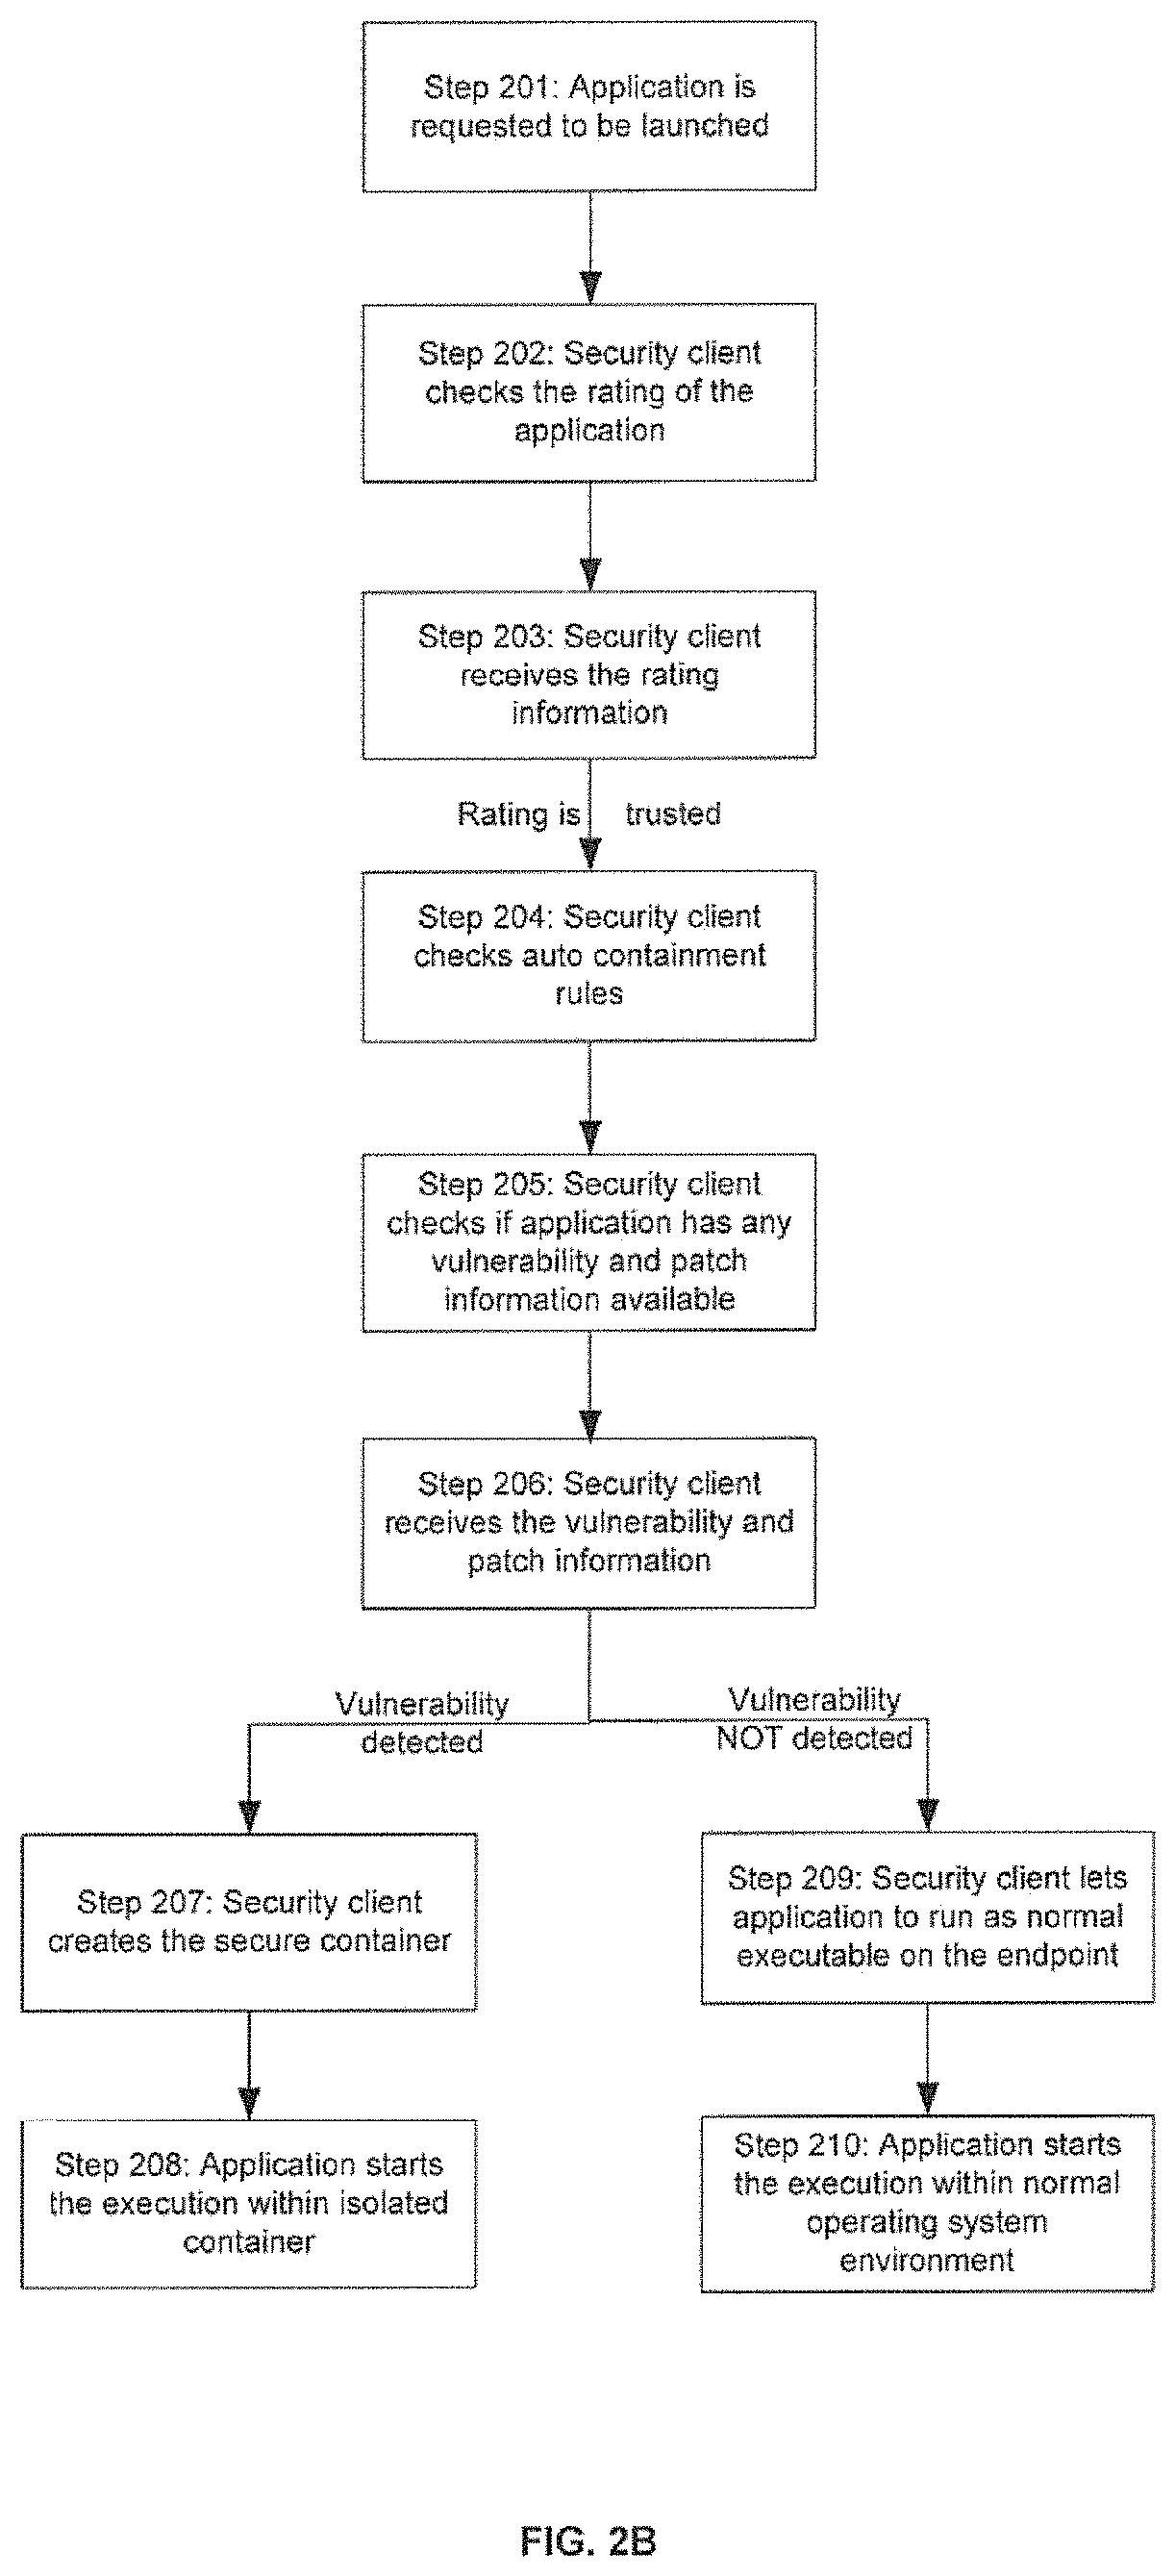 Auto-containment of potentially vulnerable applications